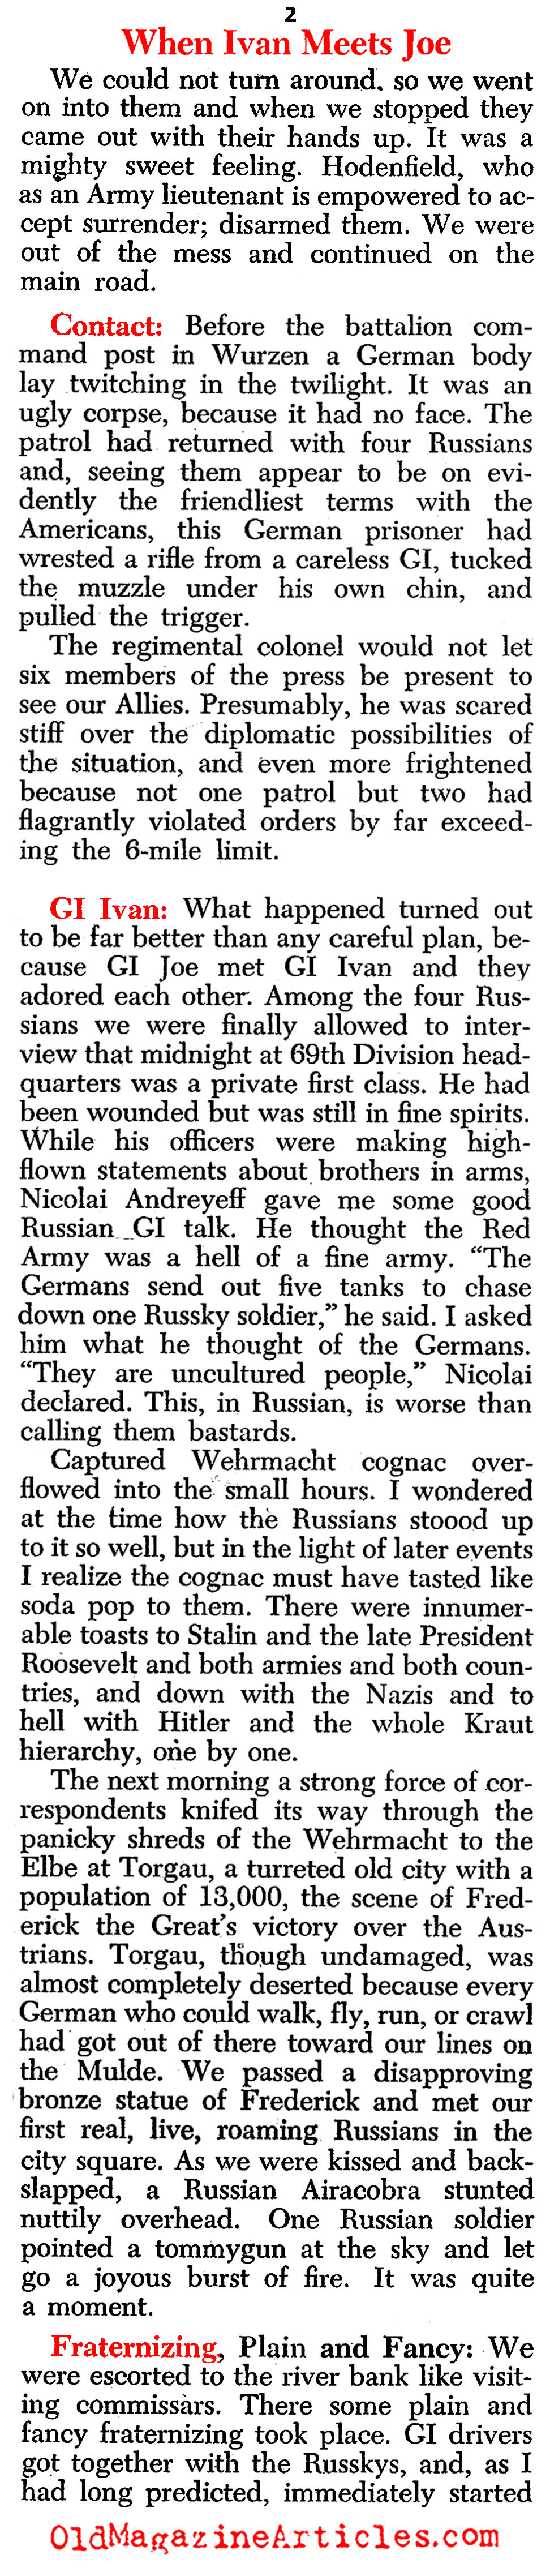 American GIs Meet the Reds on the Elbe <BR>(Newsweek & Yank Magazines, 1945)